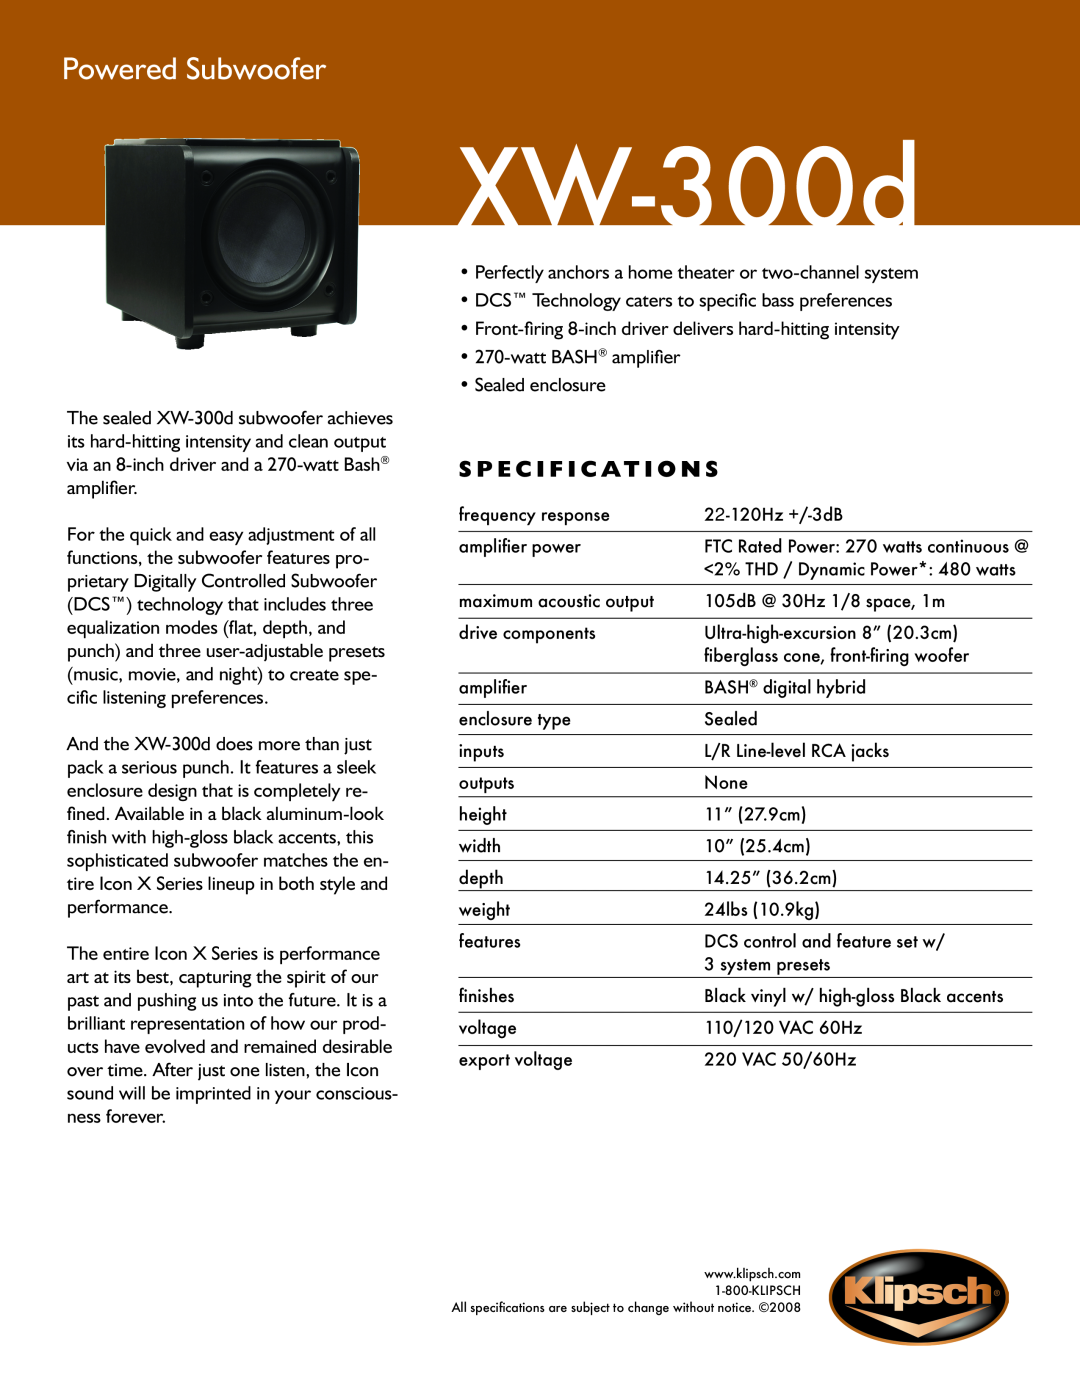 Klipsch XW-300d specifications Powered Subwoofer, S p e c i f i c a t i o n s 